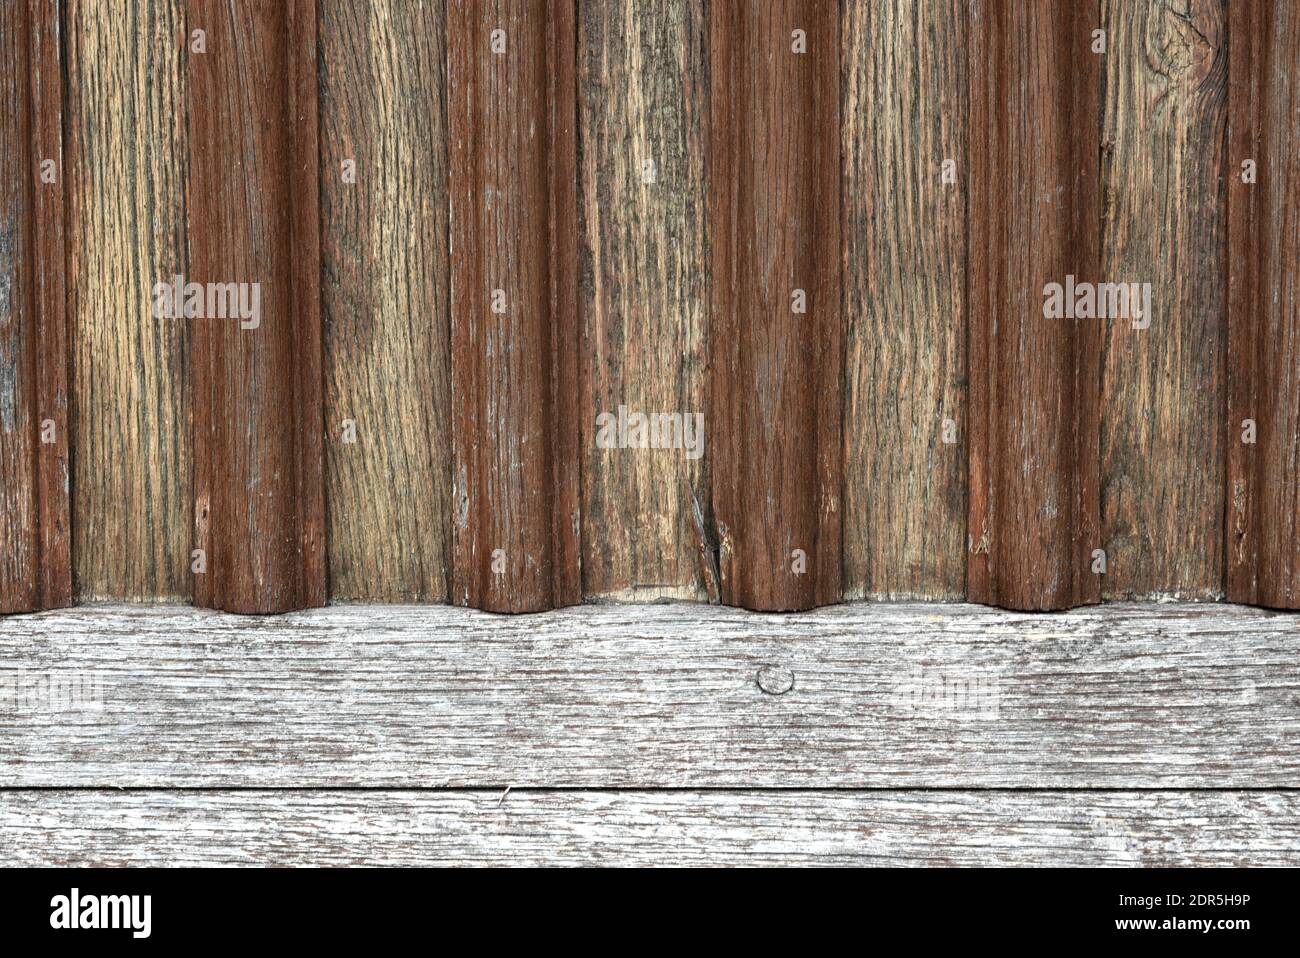 Close-up of old wooden door background with vertical and horizontal lines Stock Photo